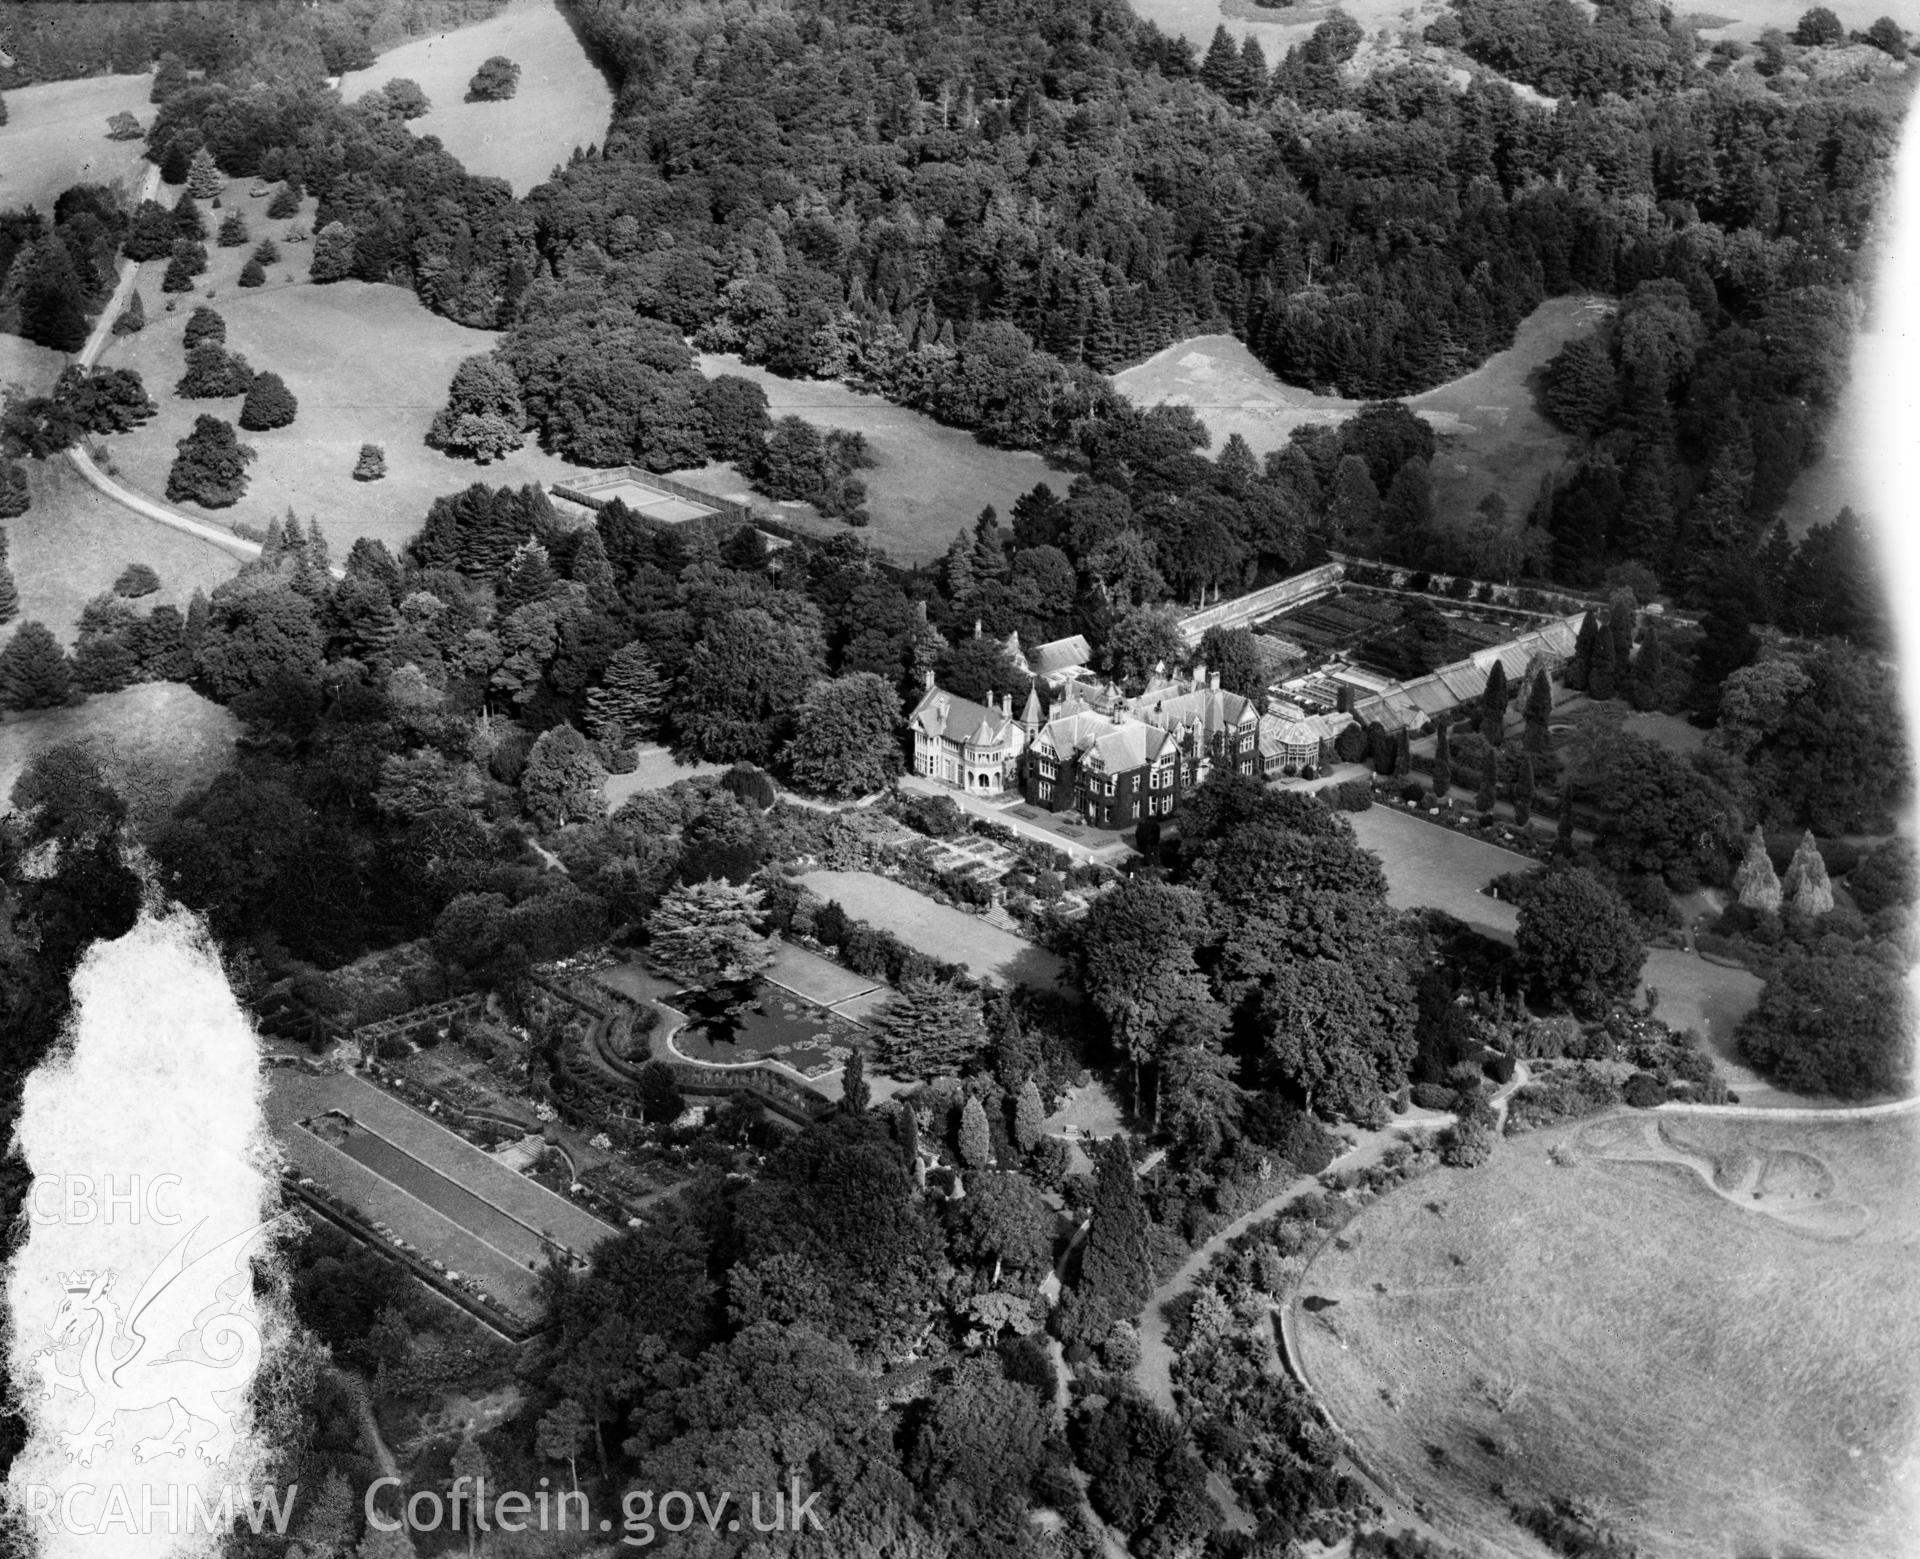 View of Bodnant House and gardens, oblique aerial view. 5?x4? black and white glass plate negative.